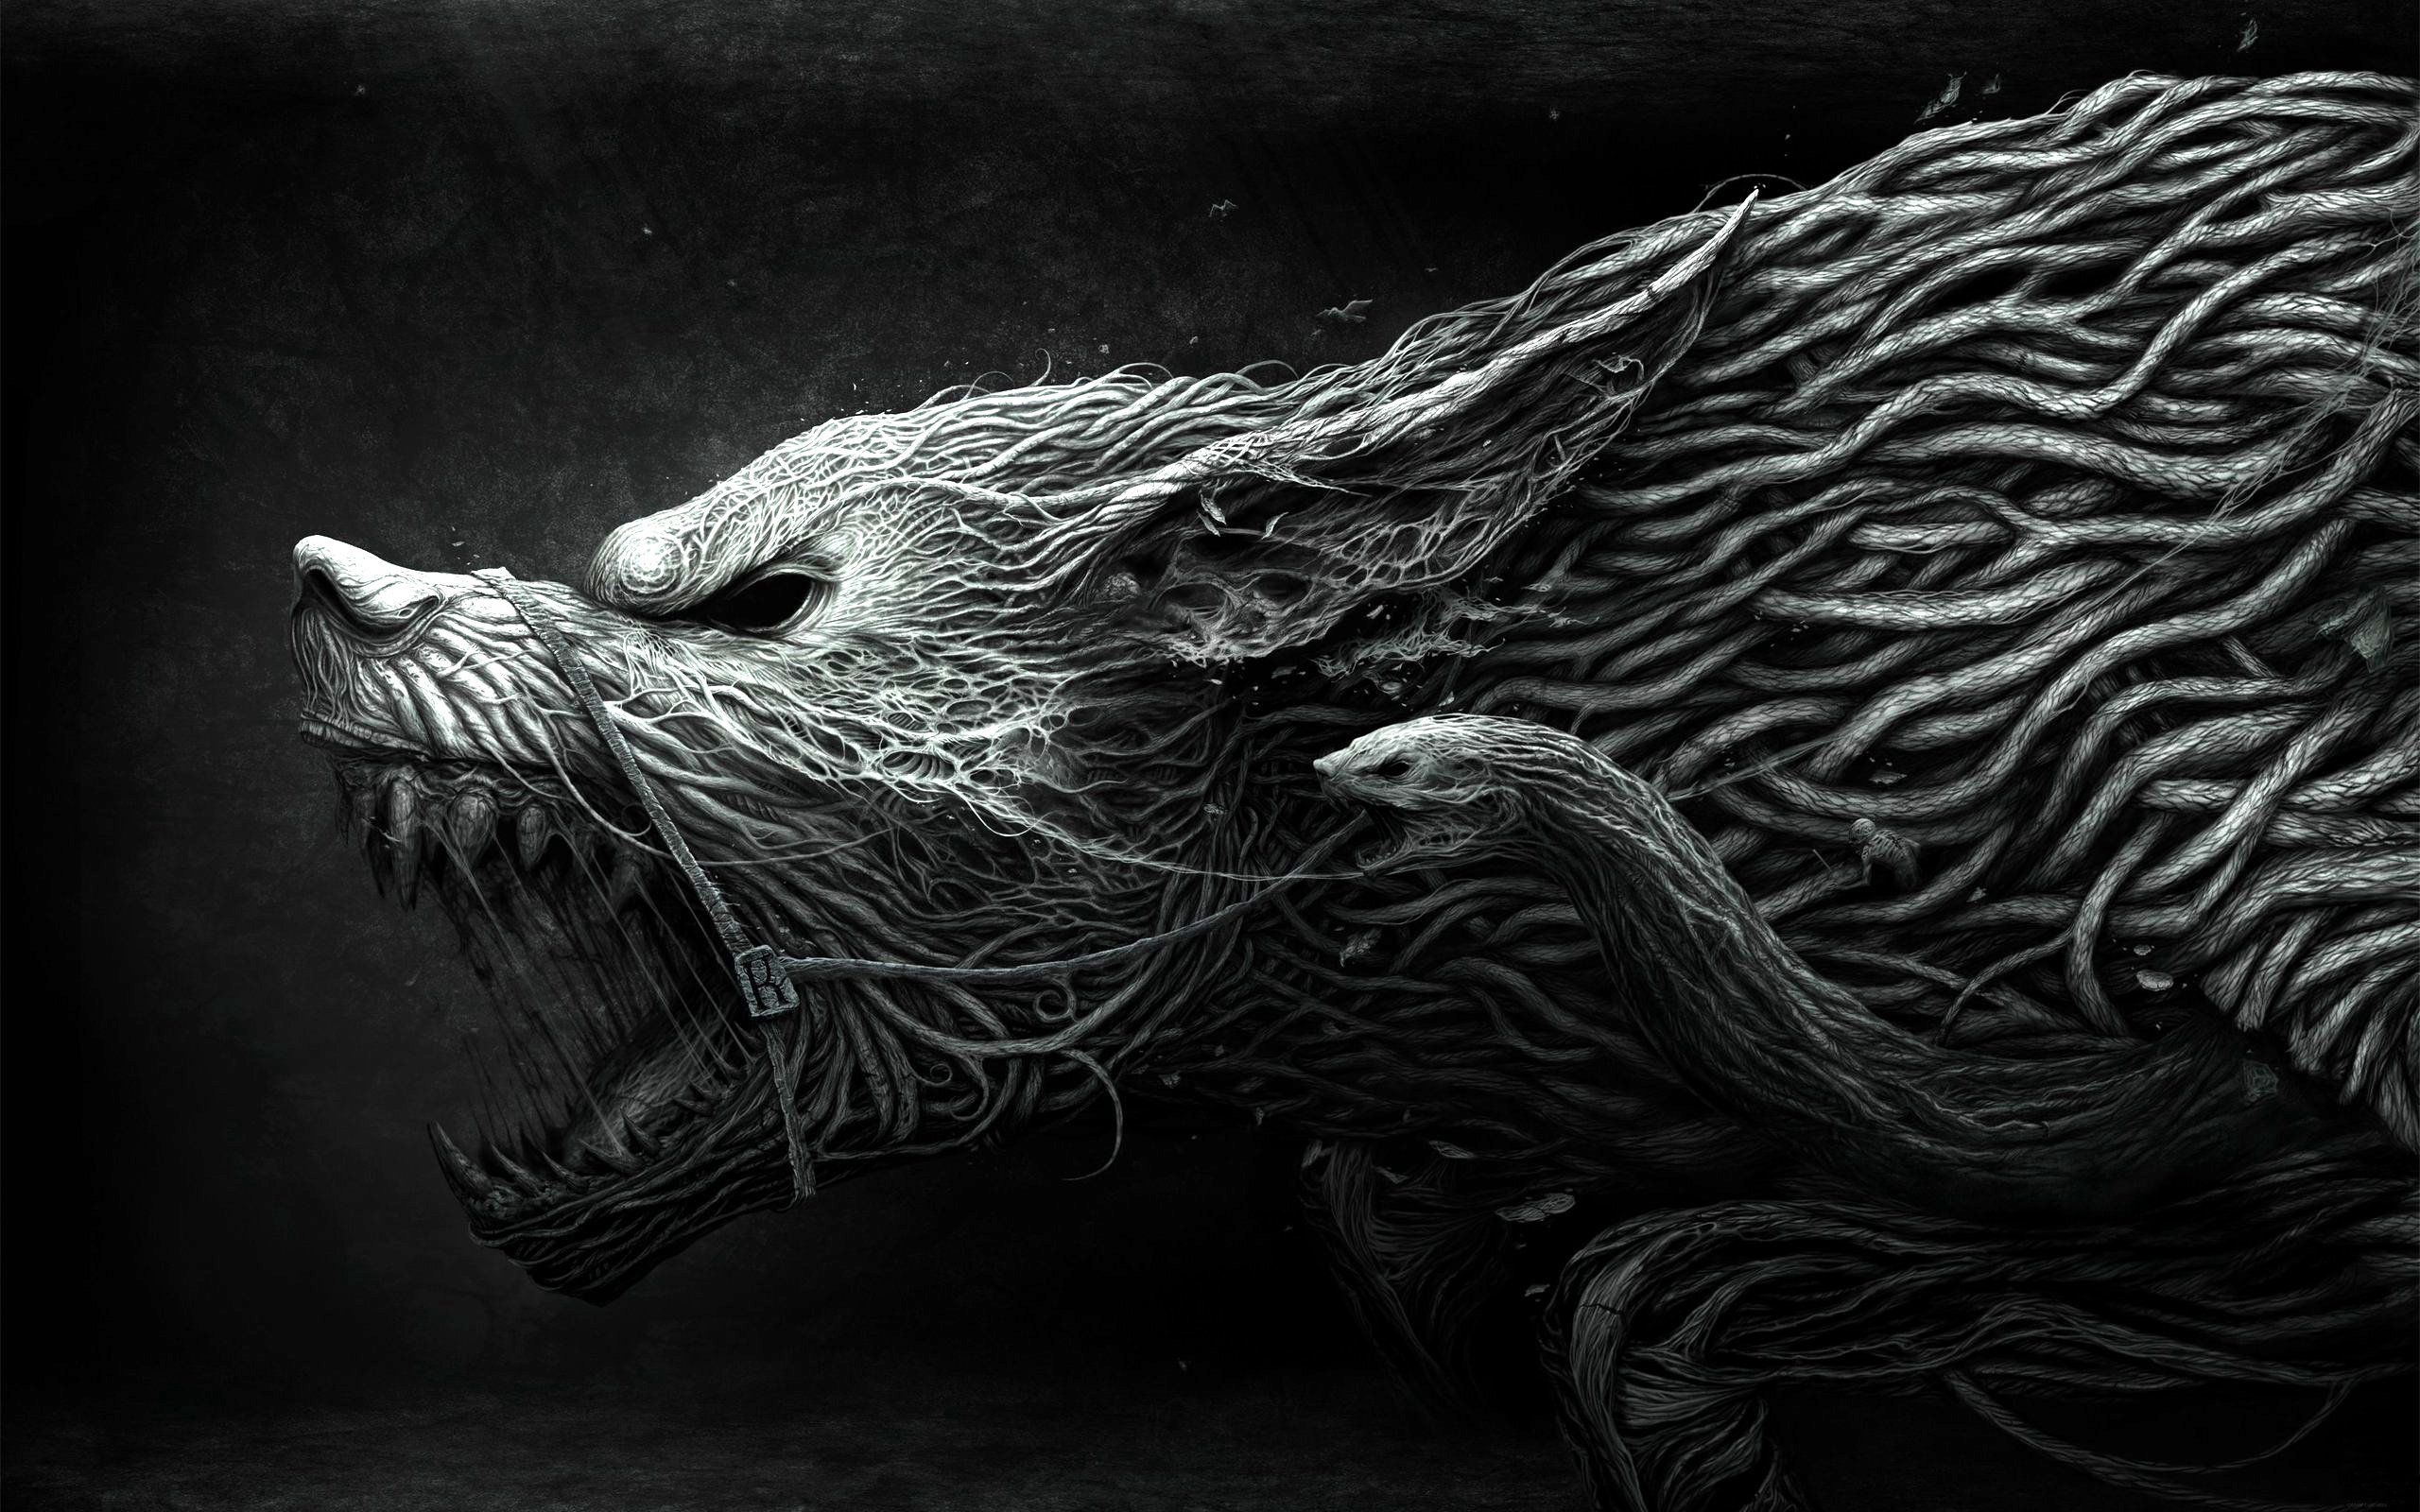 115206 download wallpaper art, black, white, aggression, picture, drawing, wolf, teeth screensavers and pictures for free